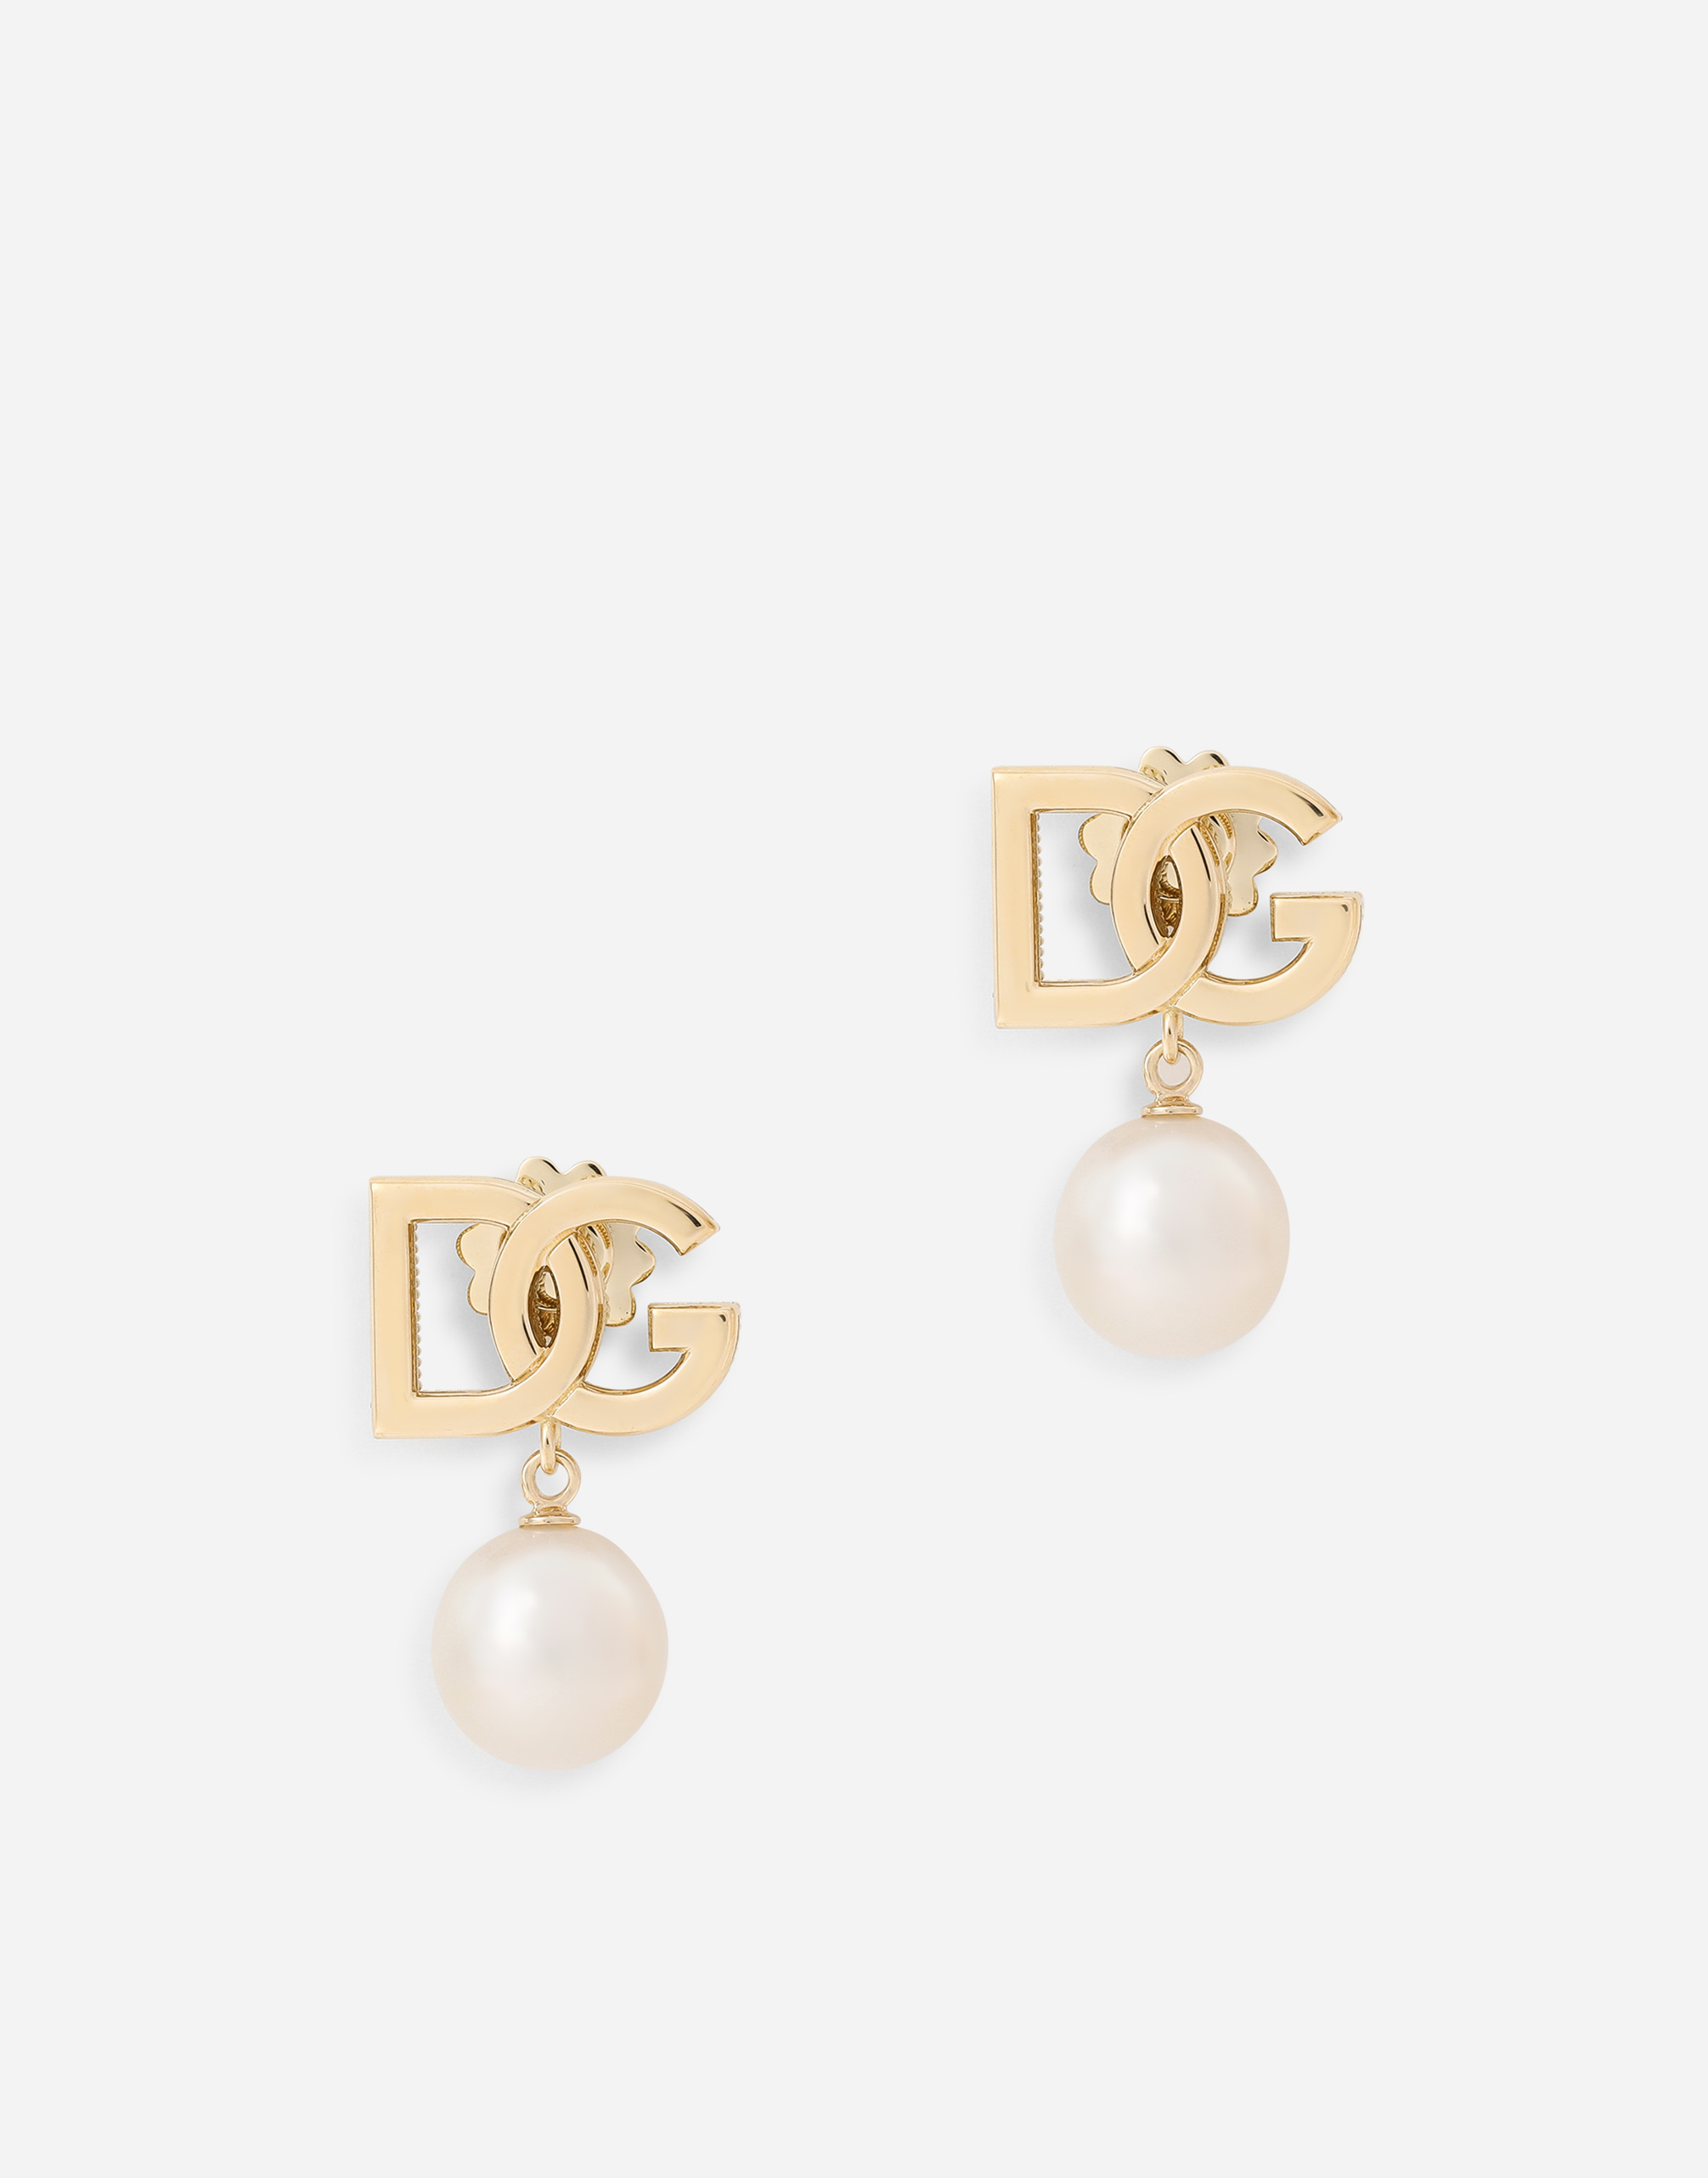 Logo earrings in yellow 18kt gold with pearls in Yellow gold